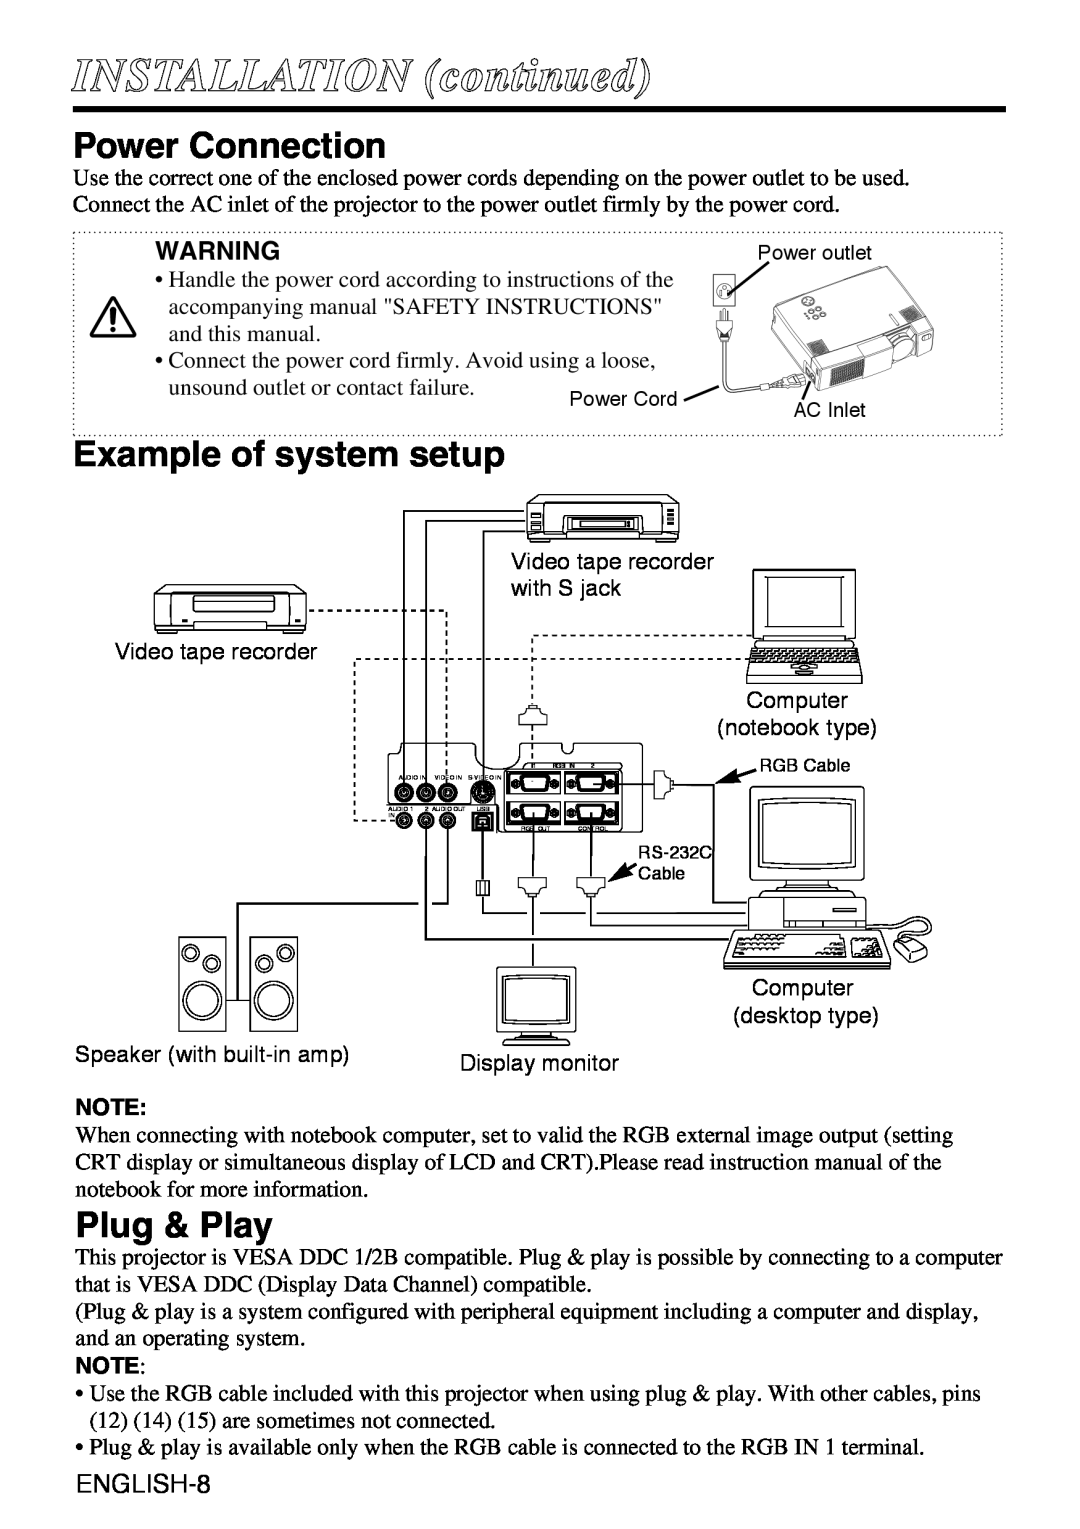 Grundig CP-731i user manual Power Connection, Example of system setup, Plug & Play, INSTALLATION continued, ENGLISH-8 